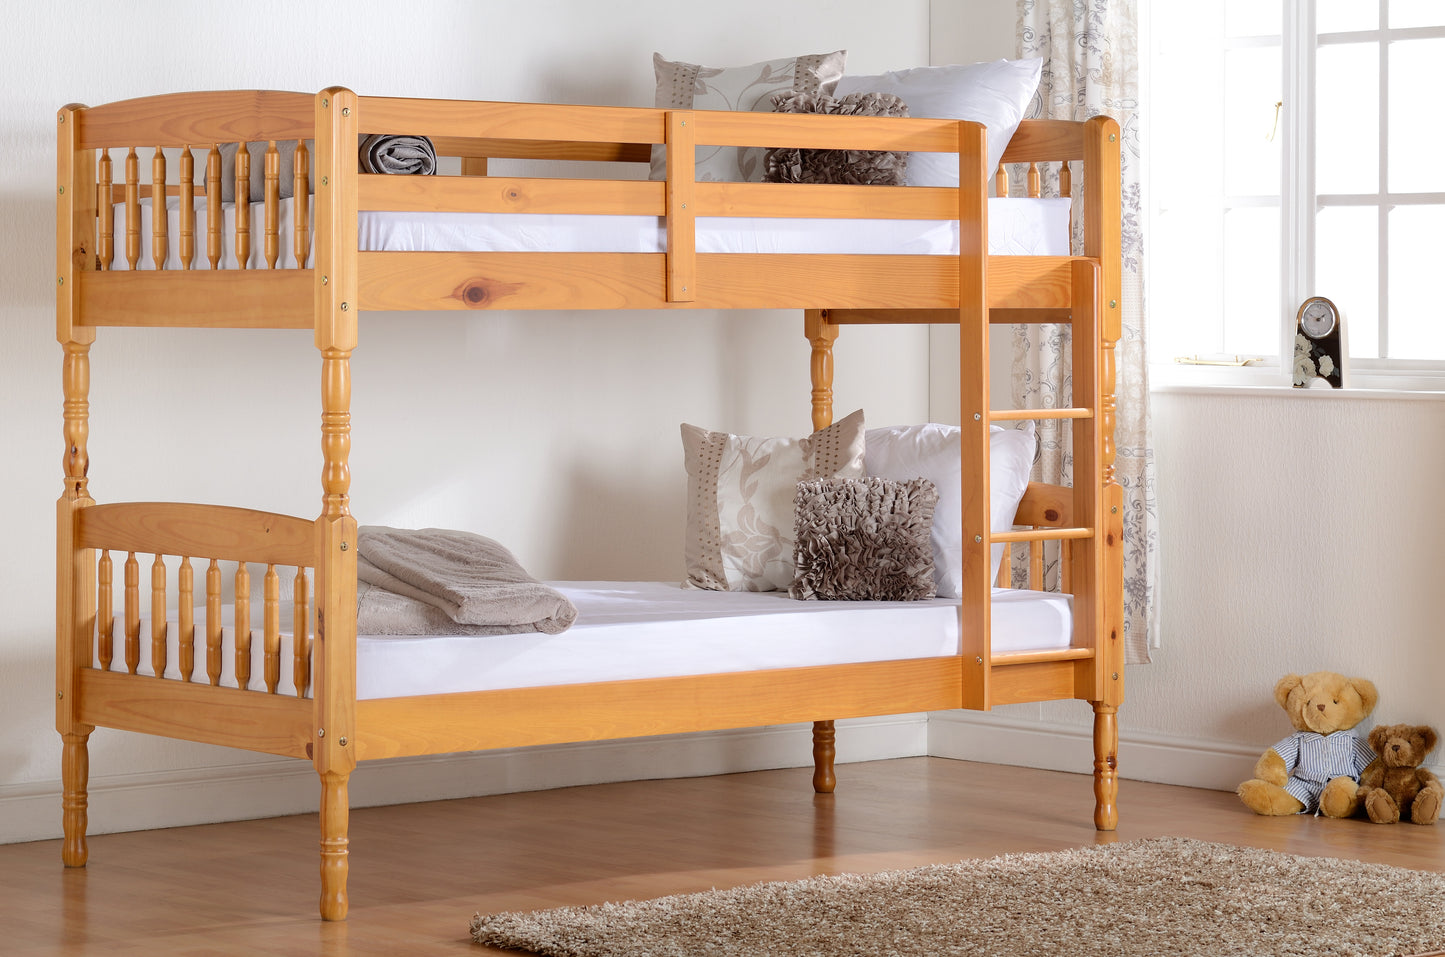 ALBANY 3' BUNK BED - ANTIQUE PINE